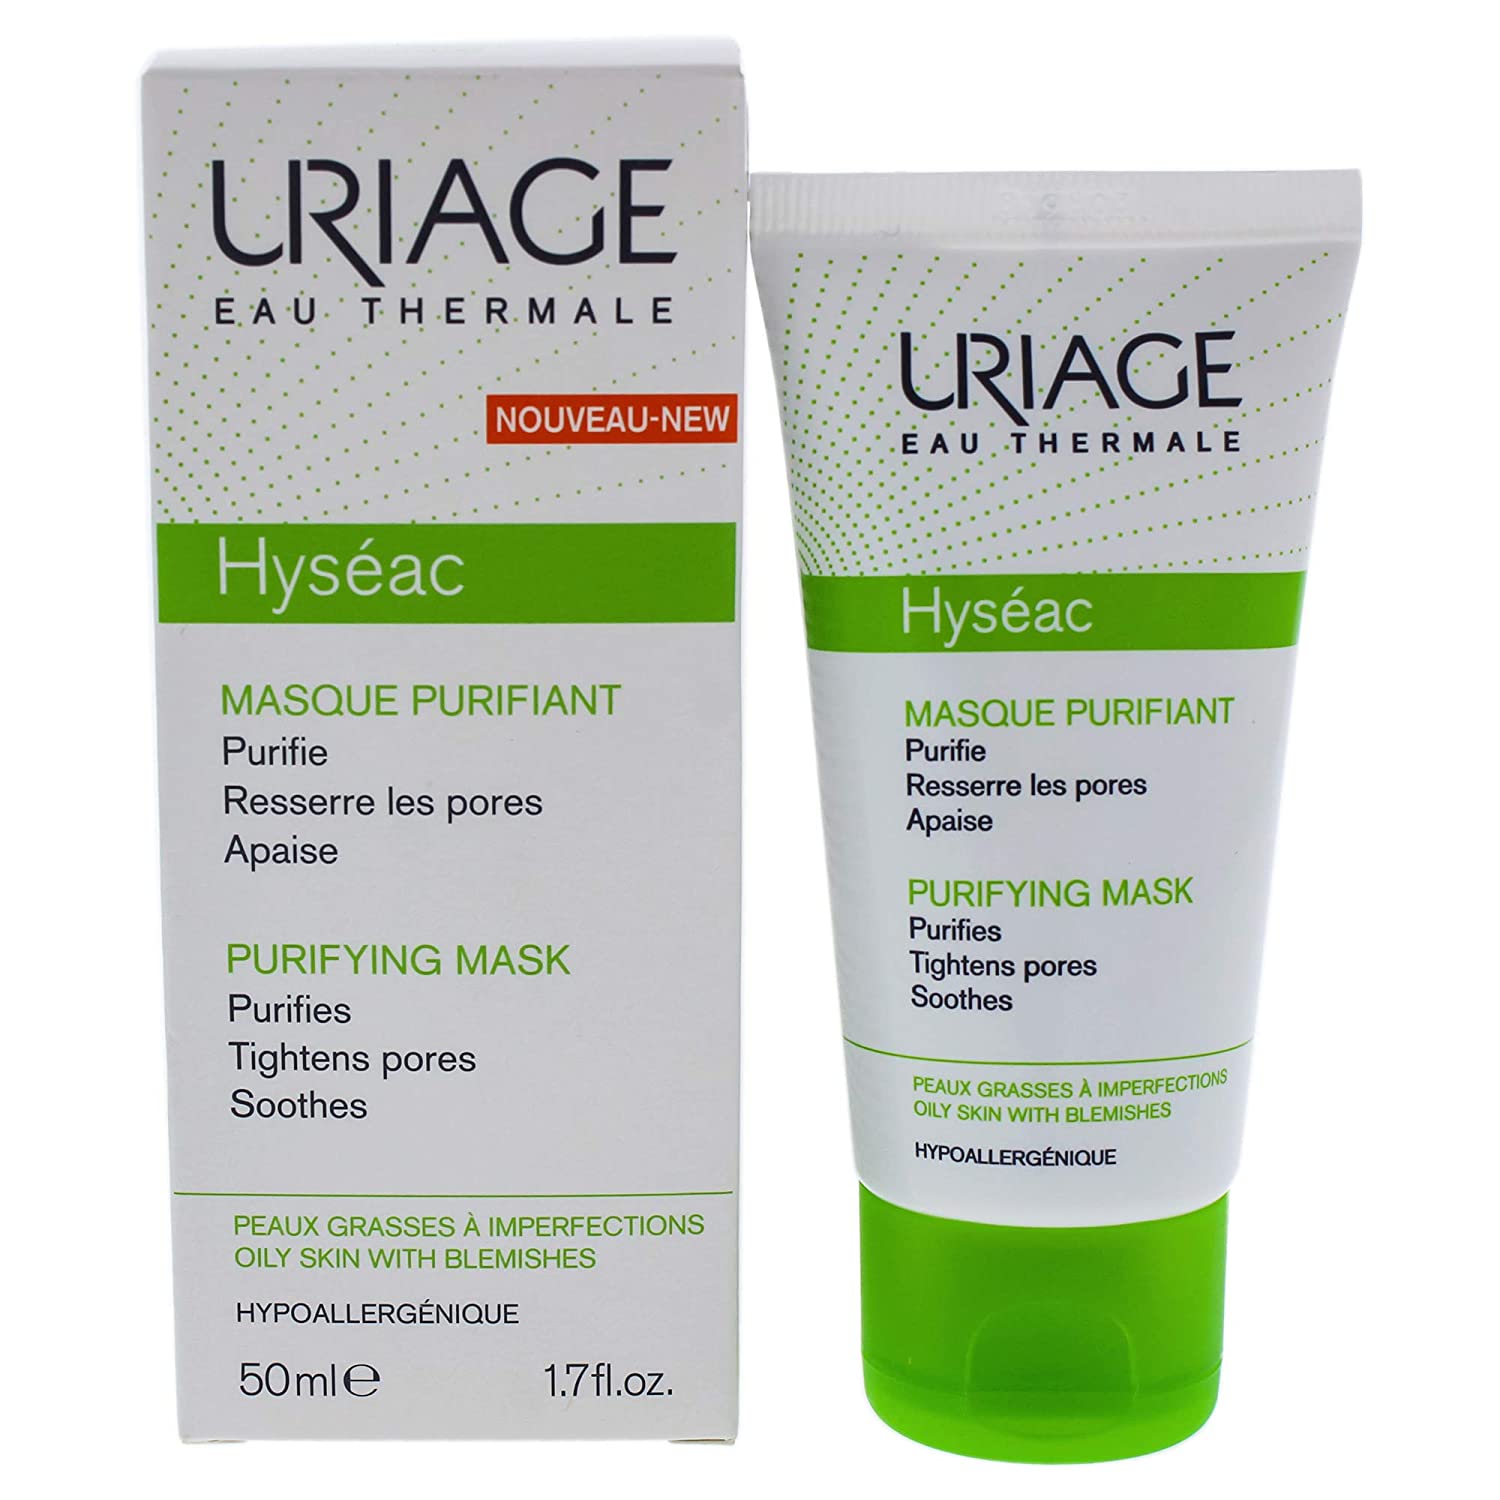 Uriage Hyseac Cleansing Mask for Oily Skin with Blemishes 50 ml